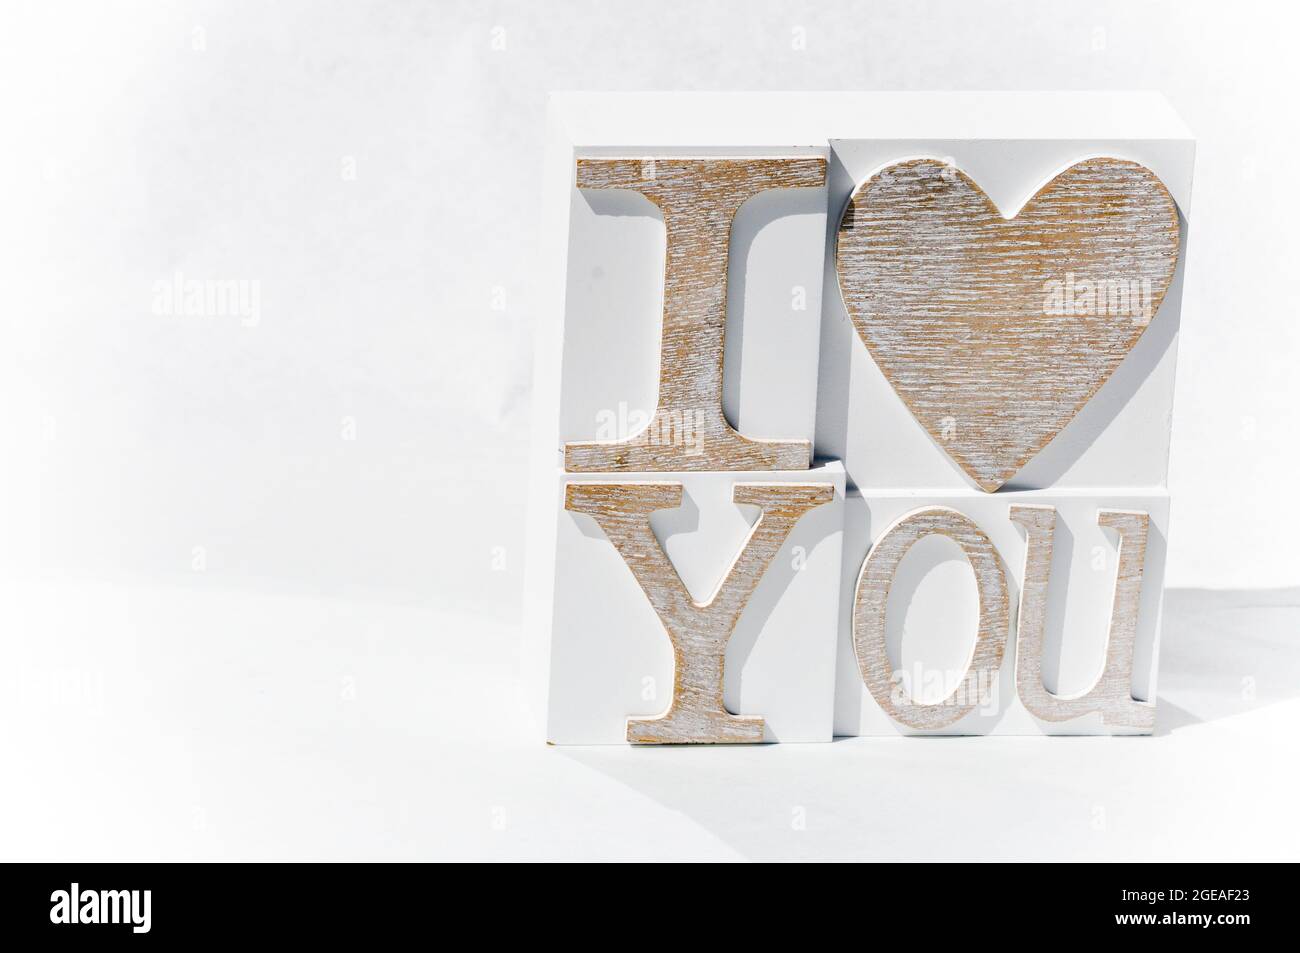 I Love You phrase set on a white tile. The image is against a white background and is mostly white with the writing in pale brown/biscuit colour Stock Photo